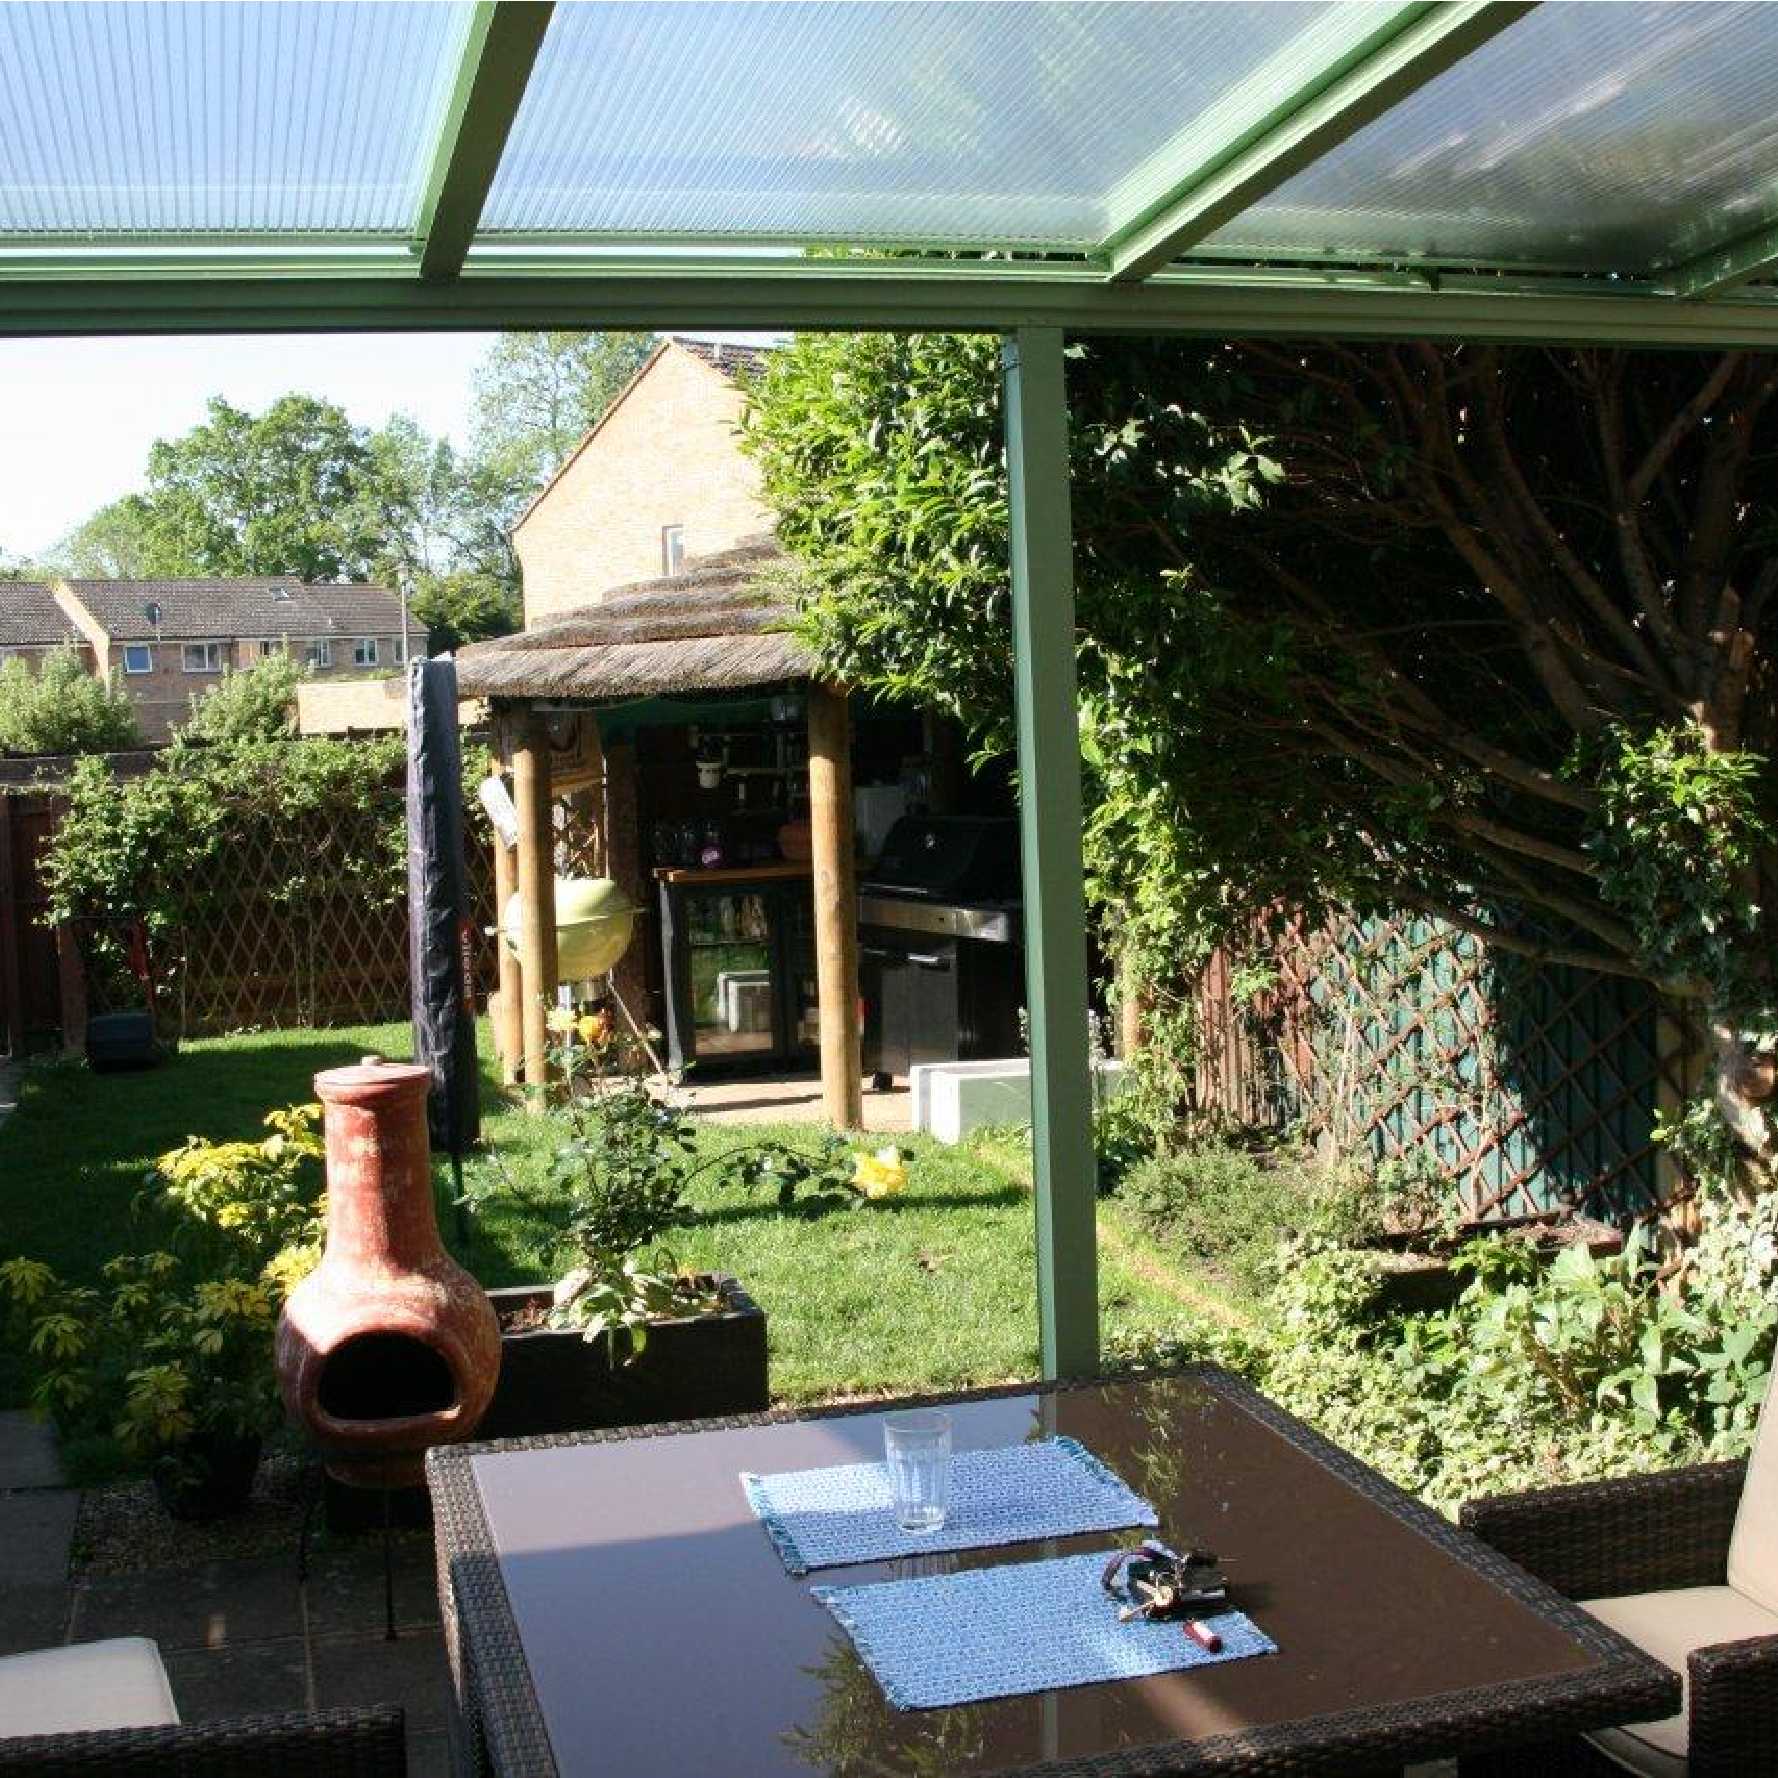 Affordable Omega Smart Lean-To Canopy, White with 16mm Polycarbonate Glazing - 7.0m (W) x 4.0m (P), (4) Supporting Posts